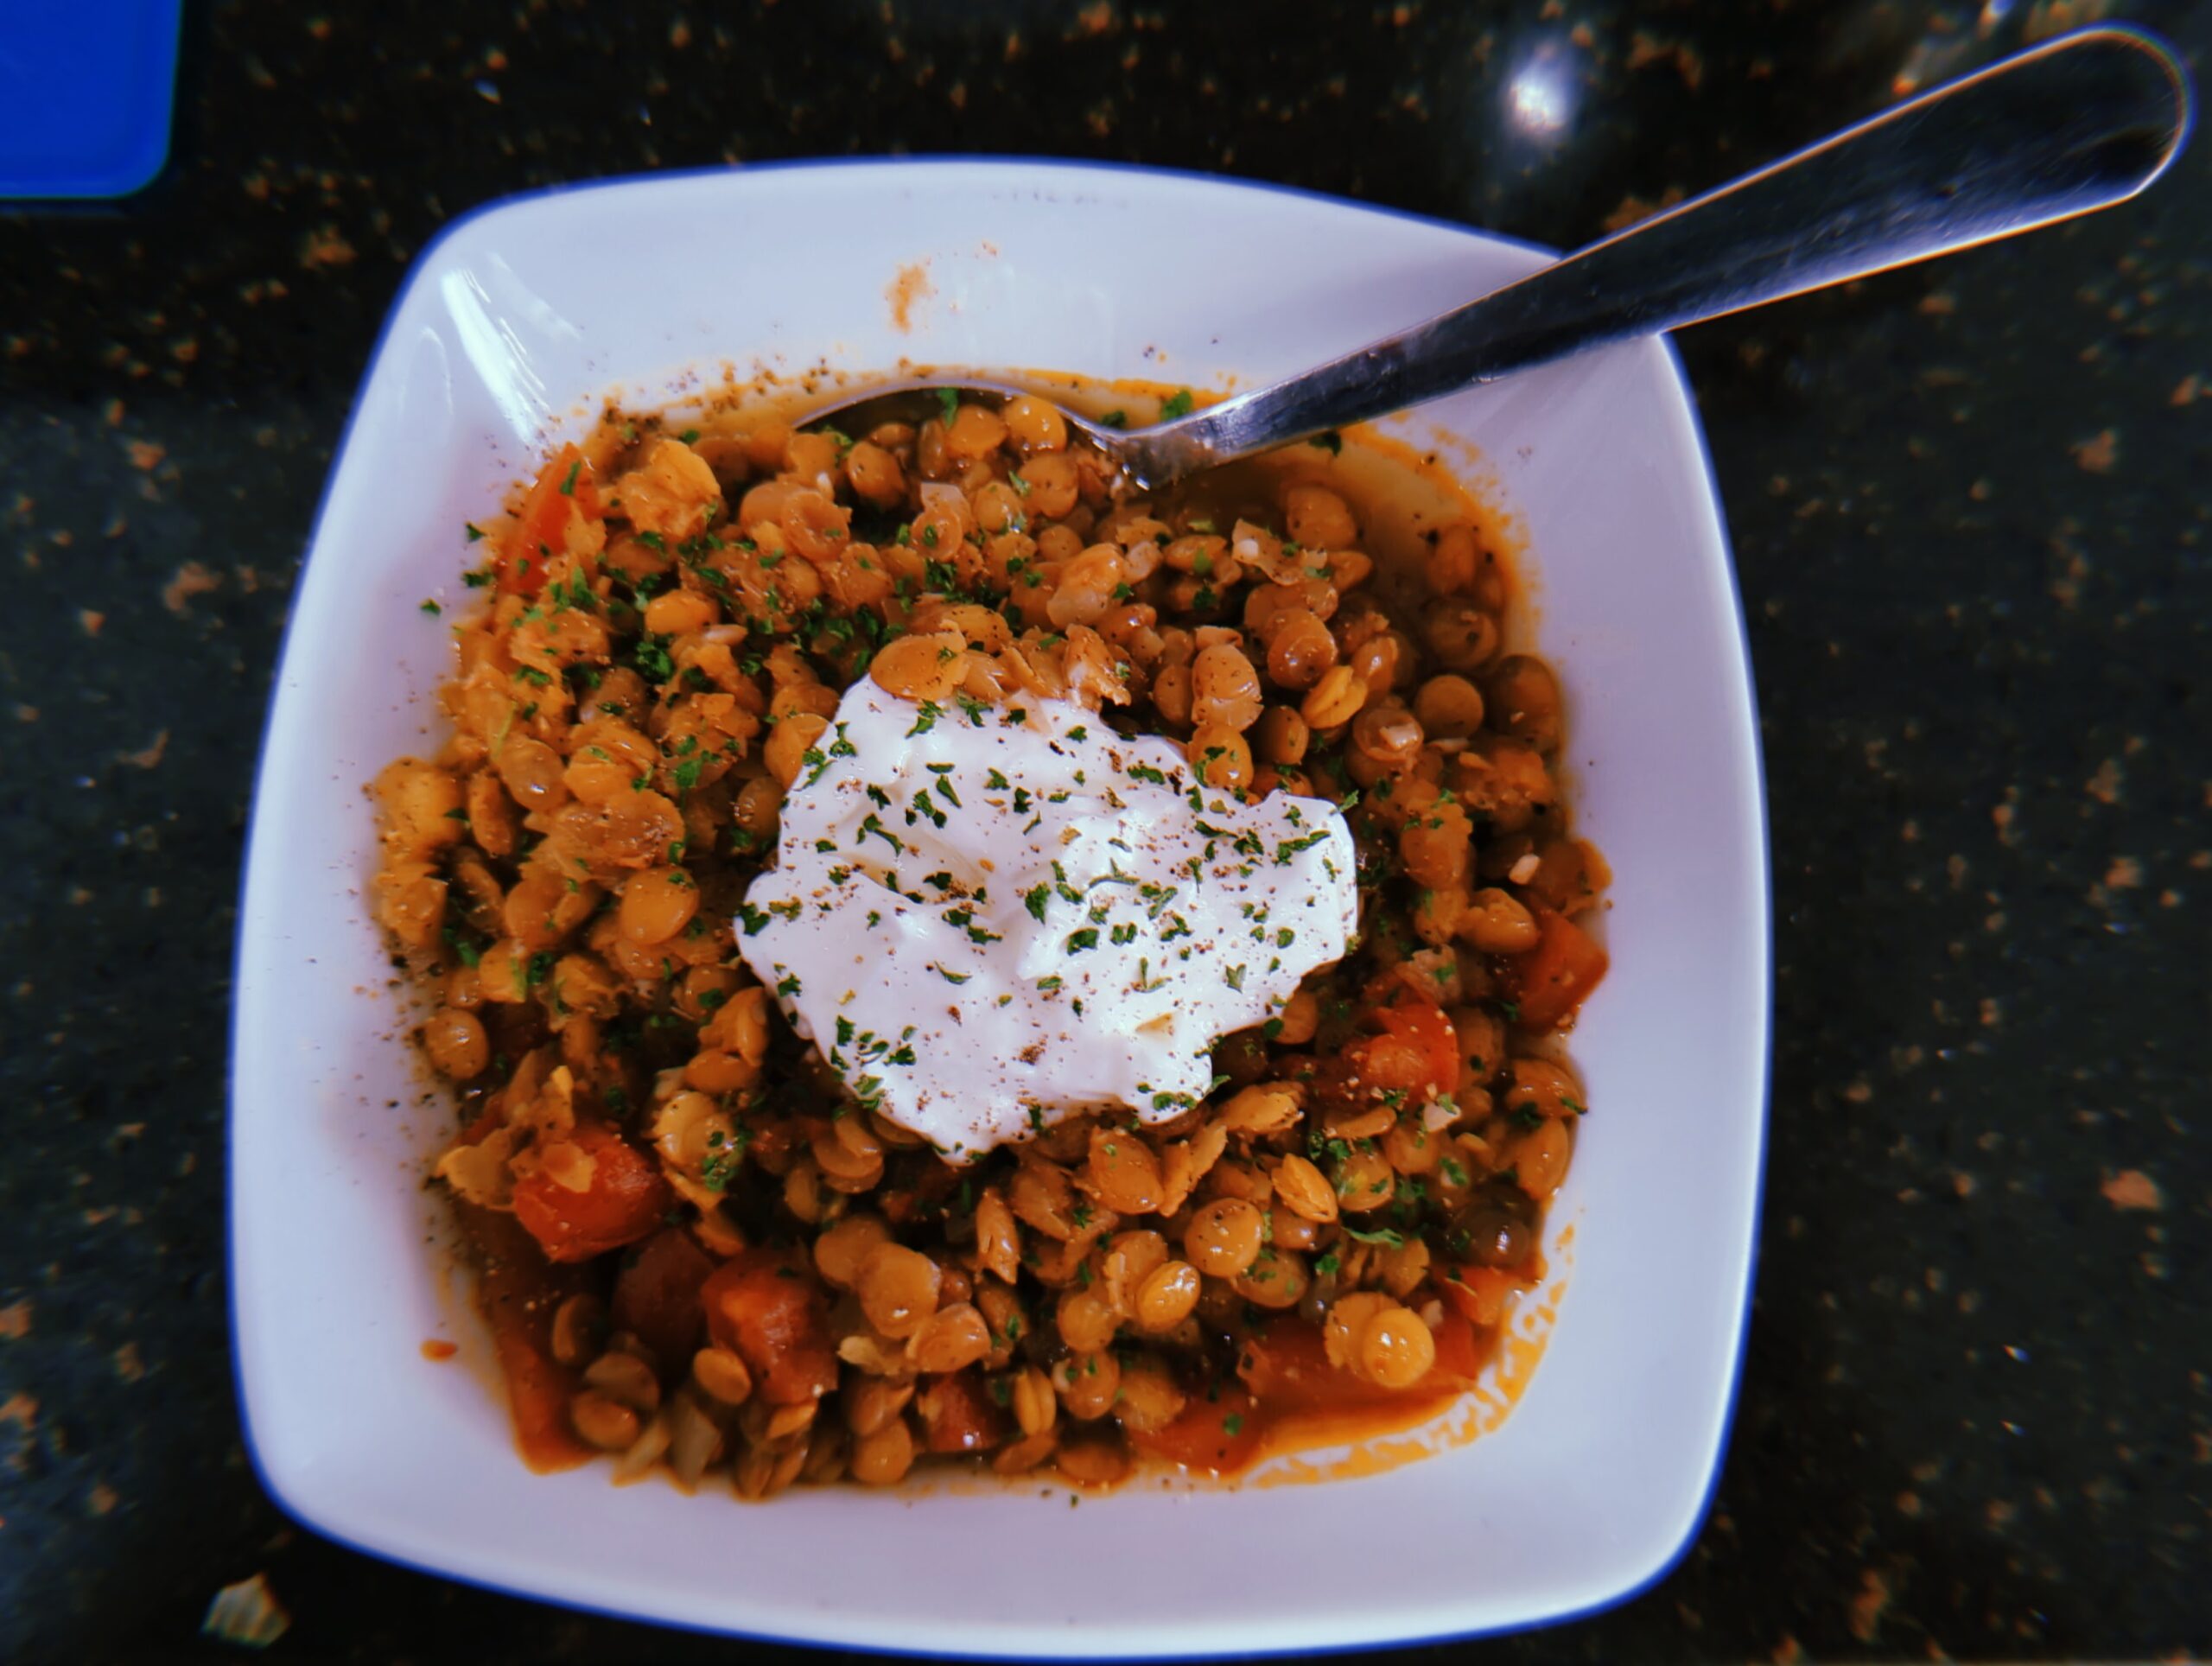 A Bowl of Lentils cooked Morrocan style with cream and parsley on top